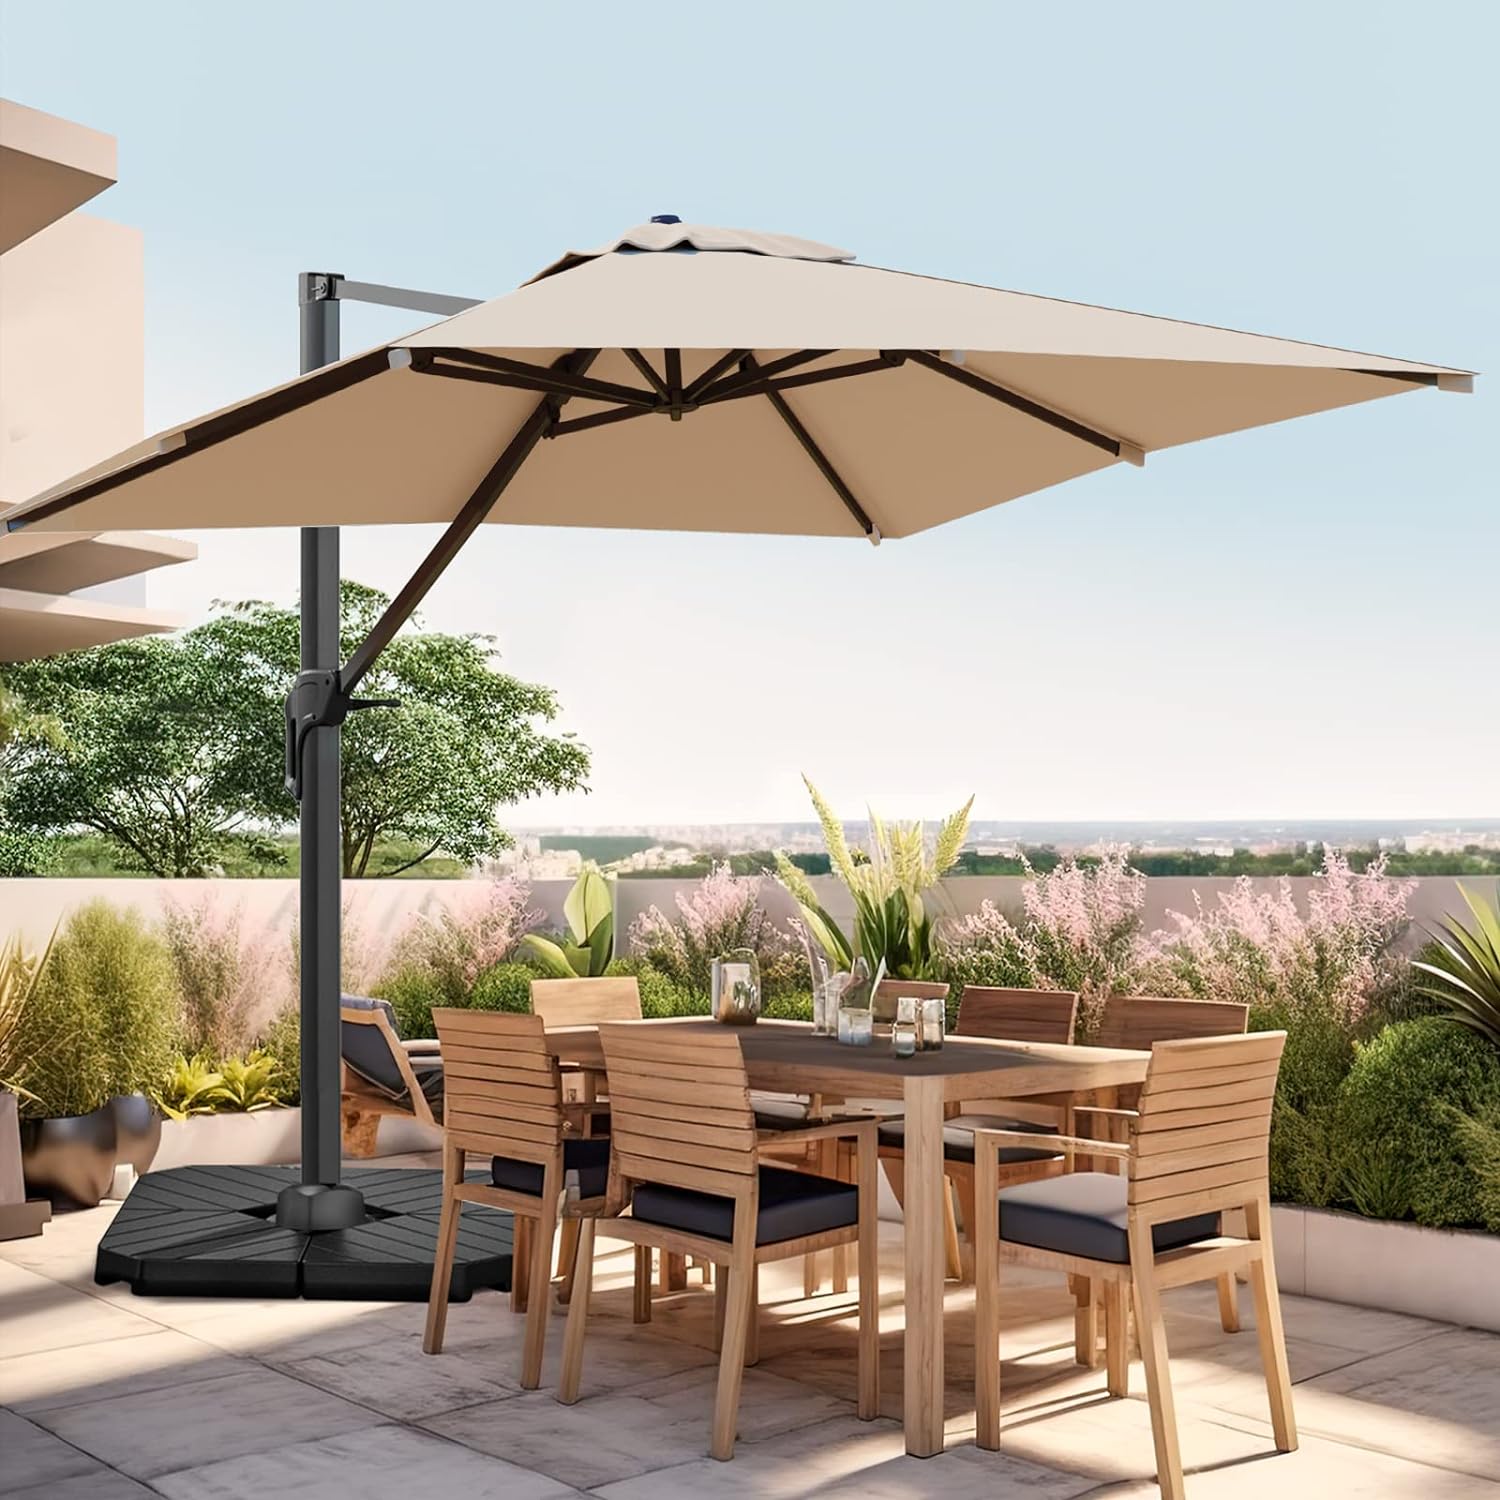 wikiwiki 10' X 13' Cantilever Patio Umbrella Outdoor Rectangle Offset Umbrella w/ 36 Month Fade Resistance Recycled Fabric, 6-Level 360Rotation Aluminum Pole for Deck Pool, Beige